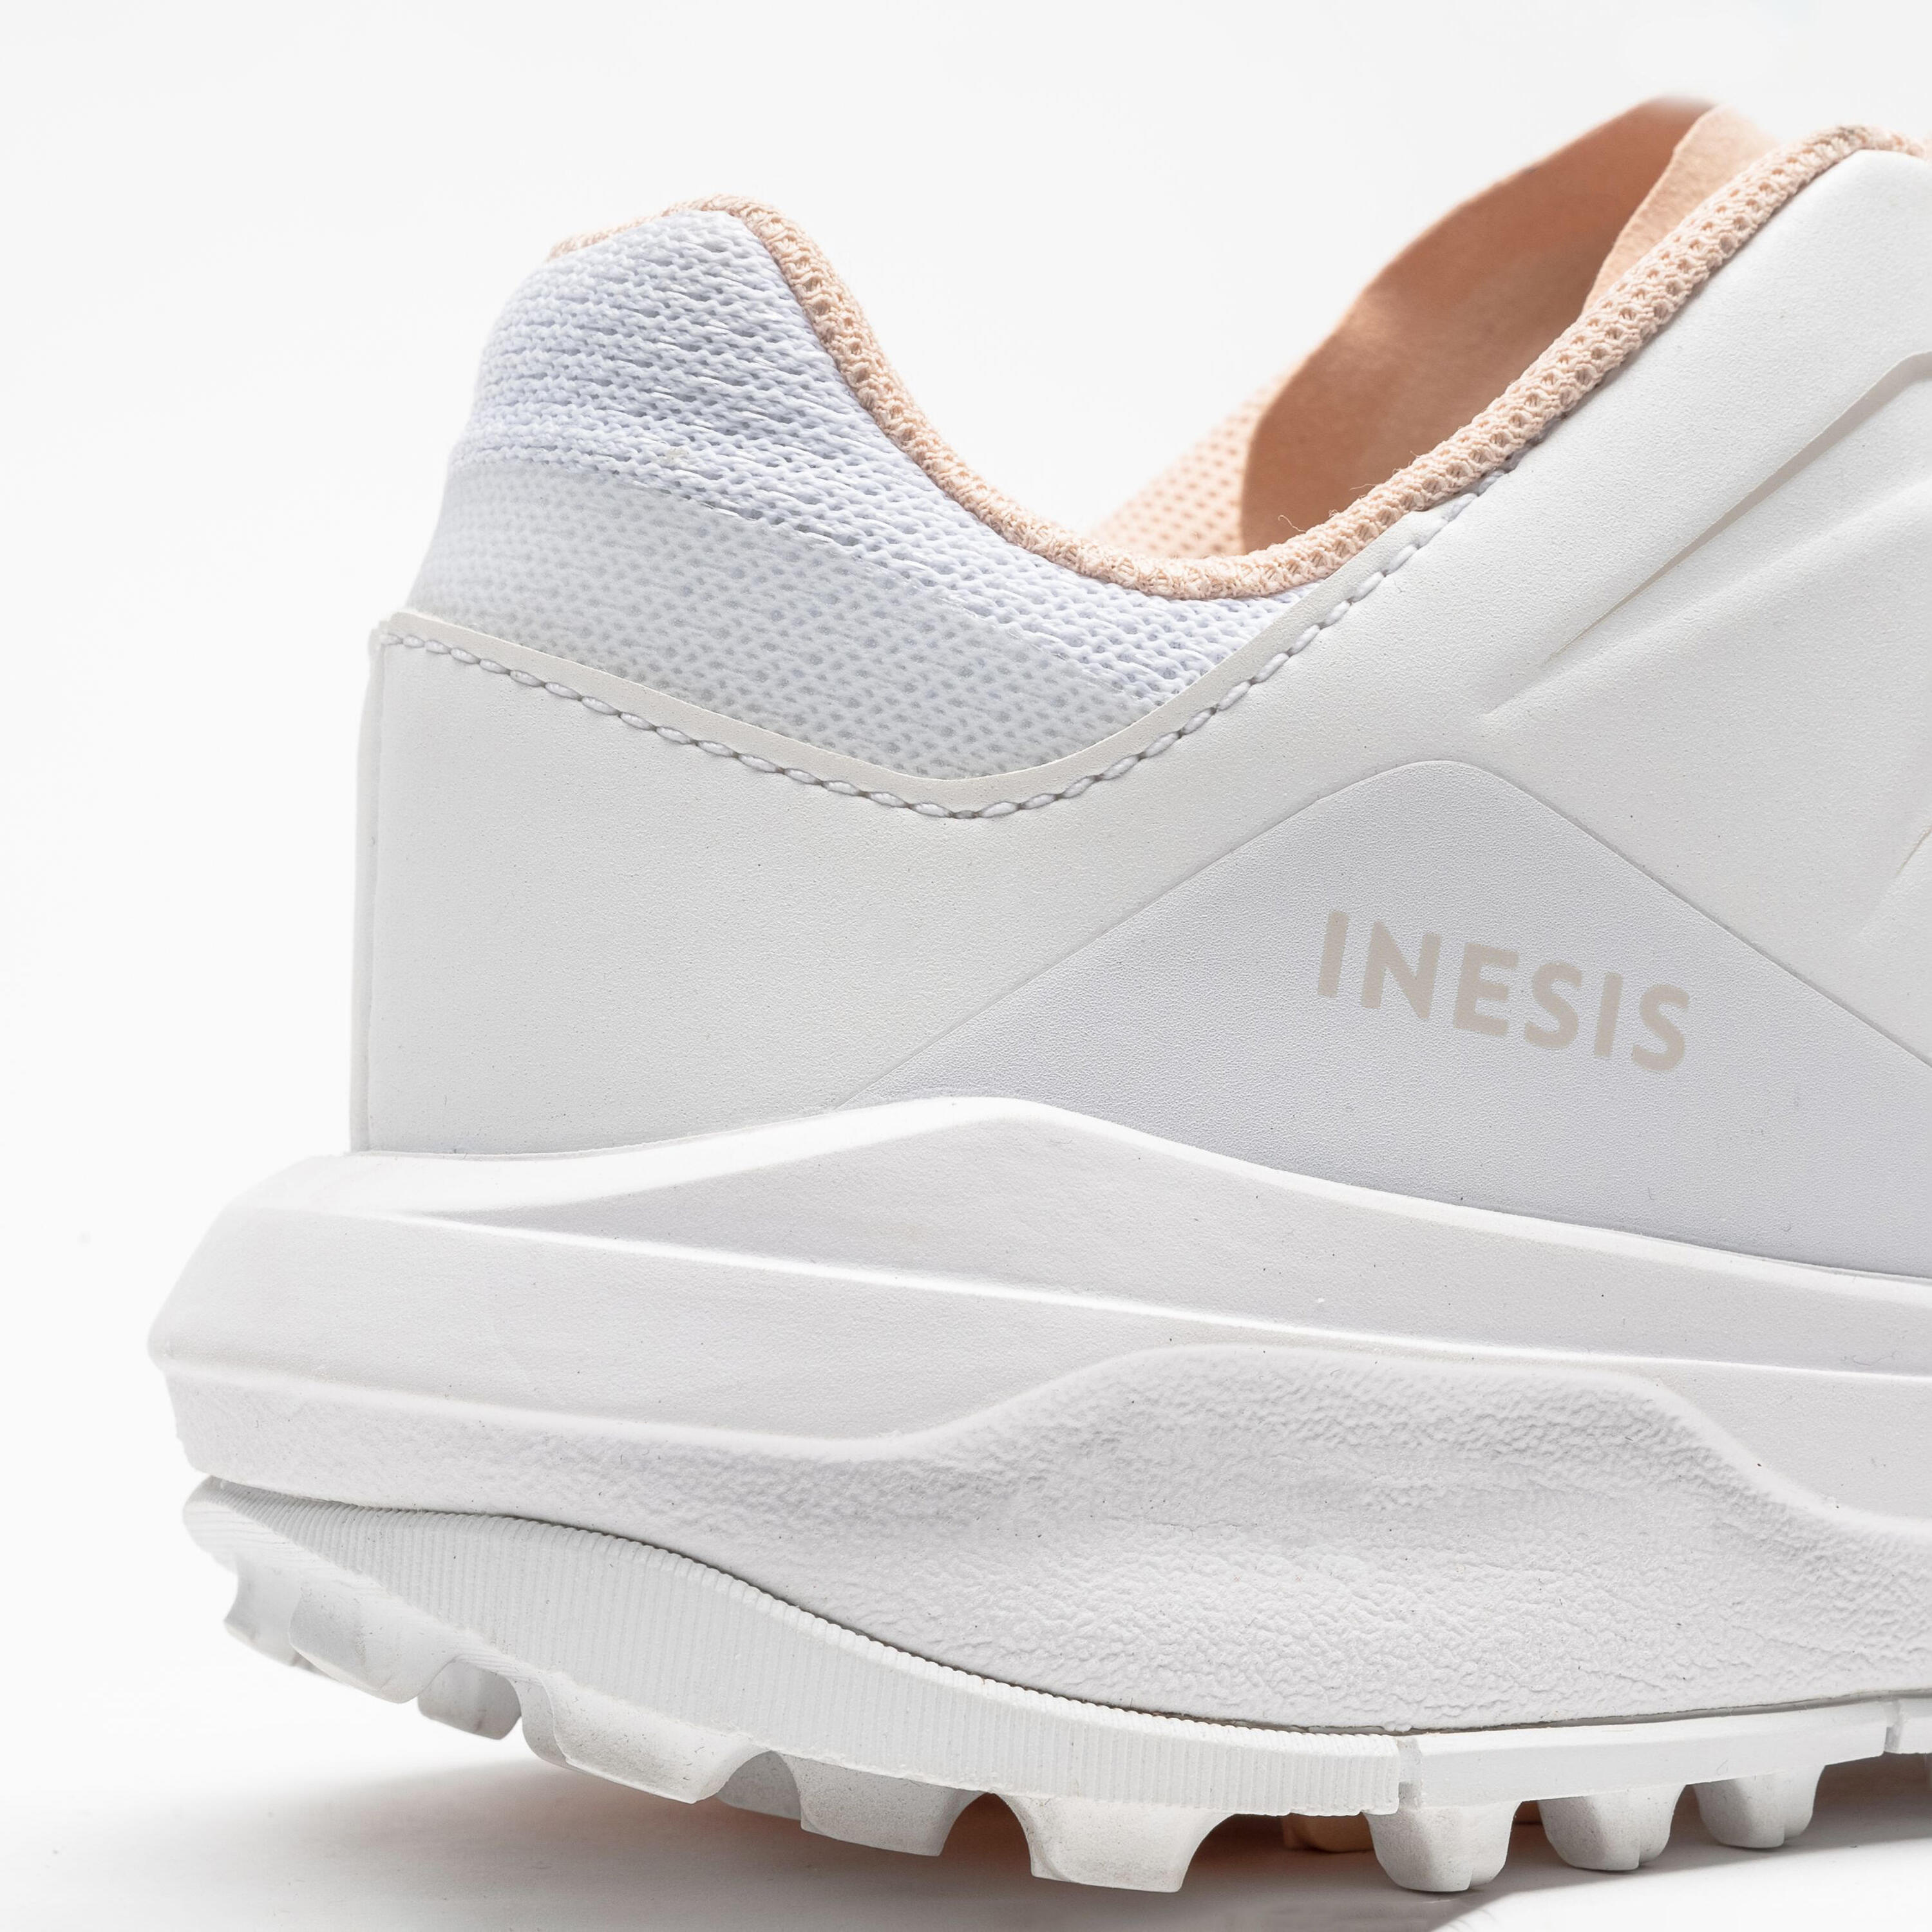 Women's Breathable Golf Shoes - WW 500 White & Pink/Beige 6/6